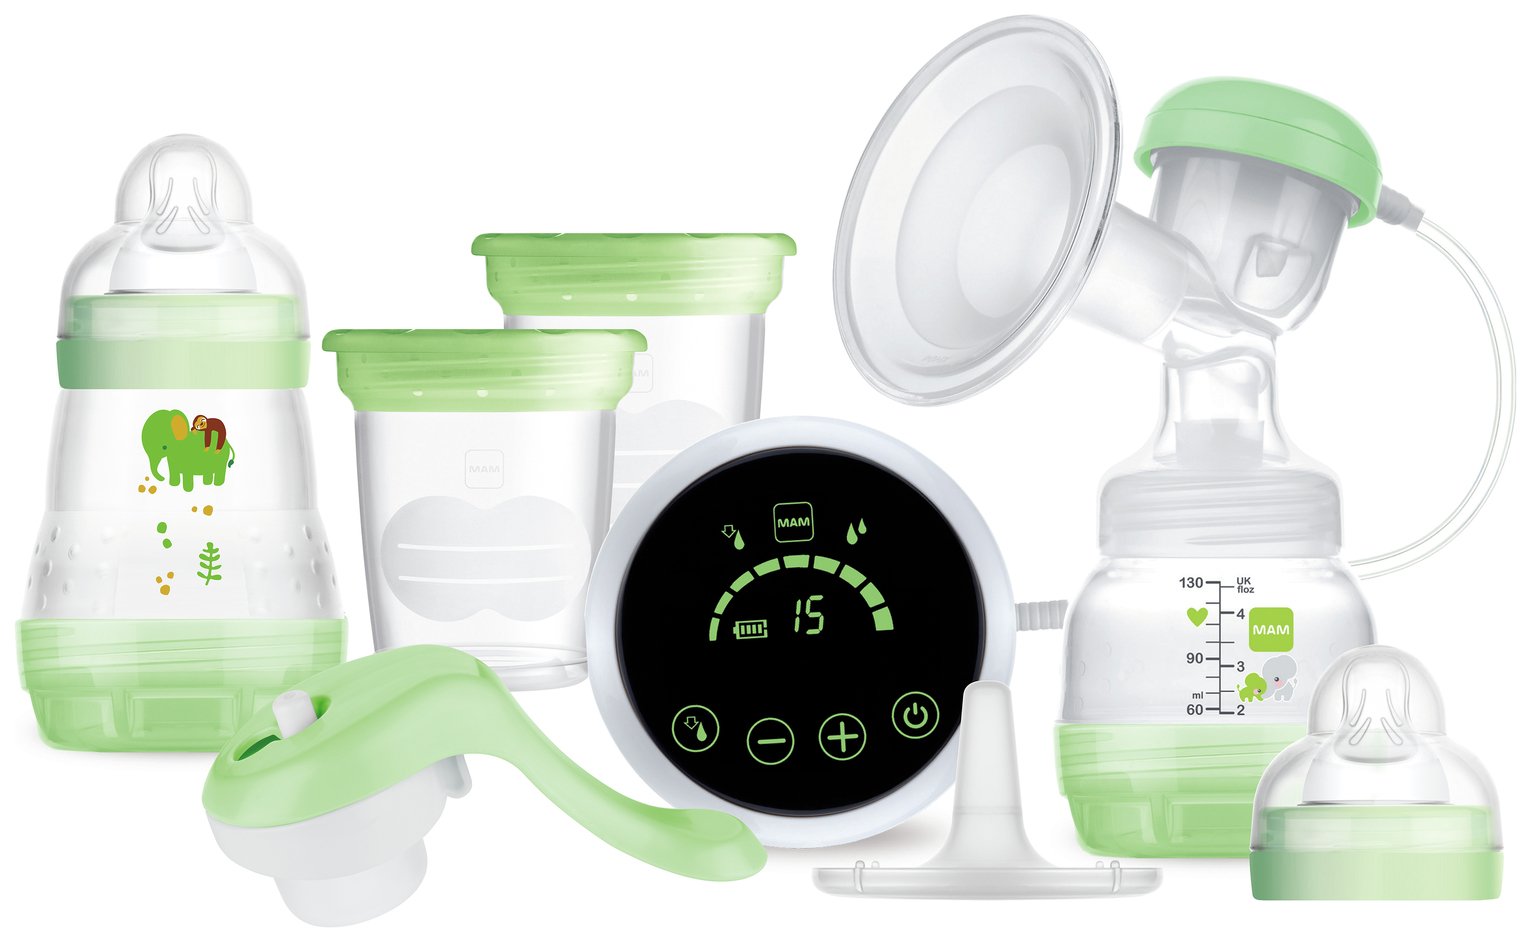 MAM 2-in-1 Single Electric and Manual Breast Pump